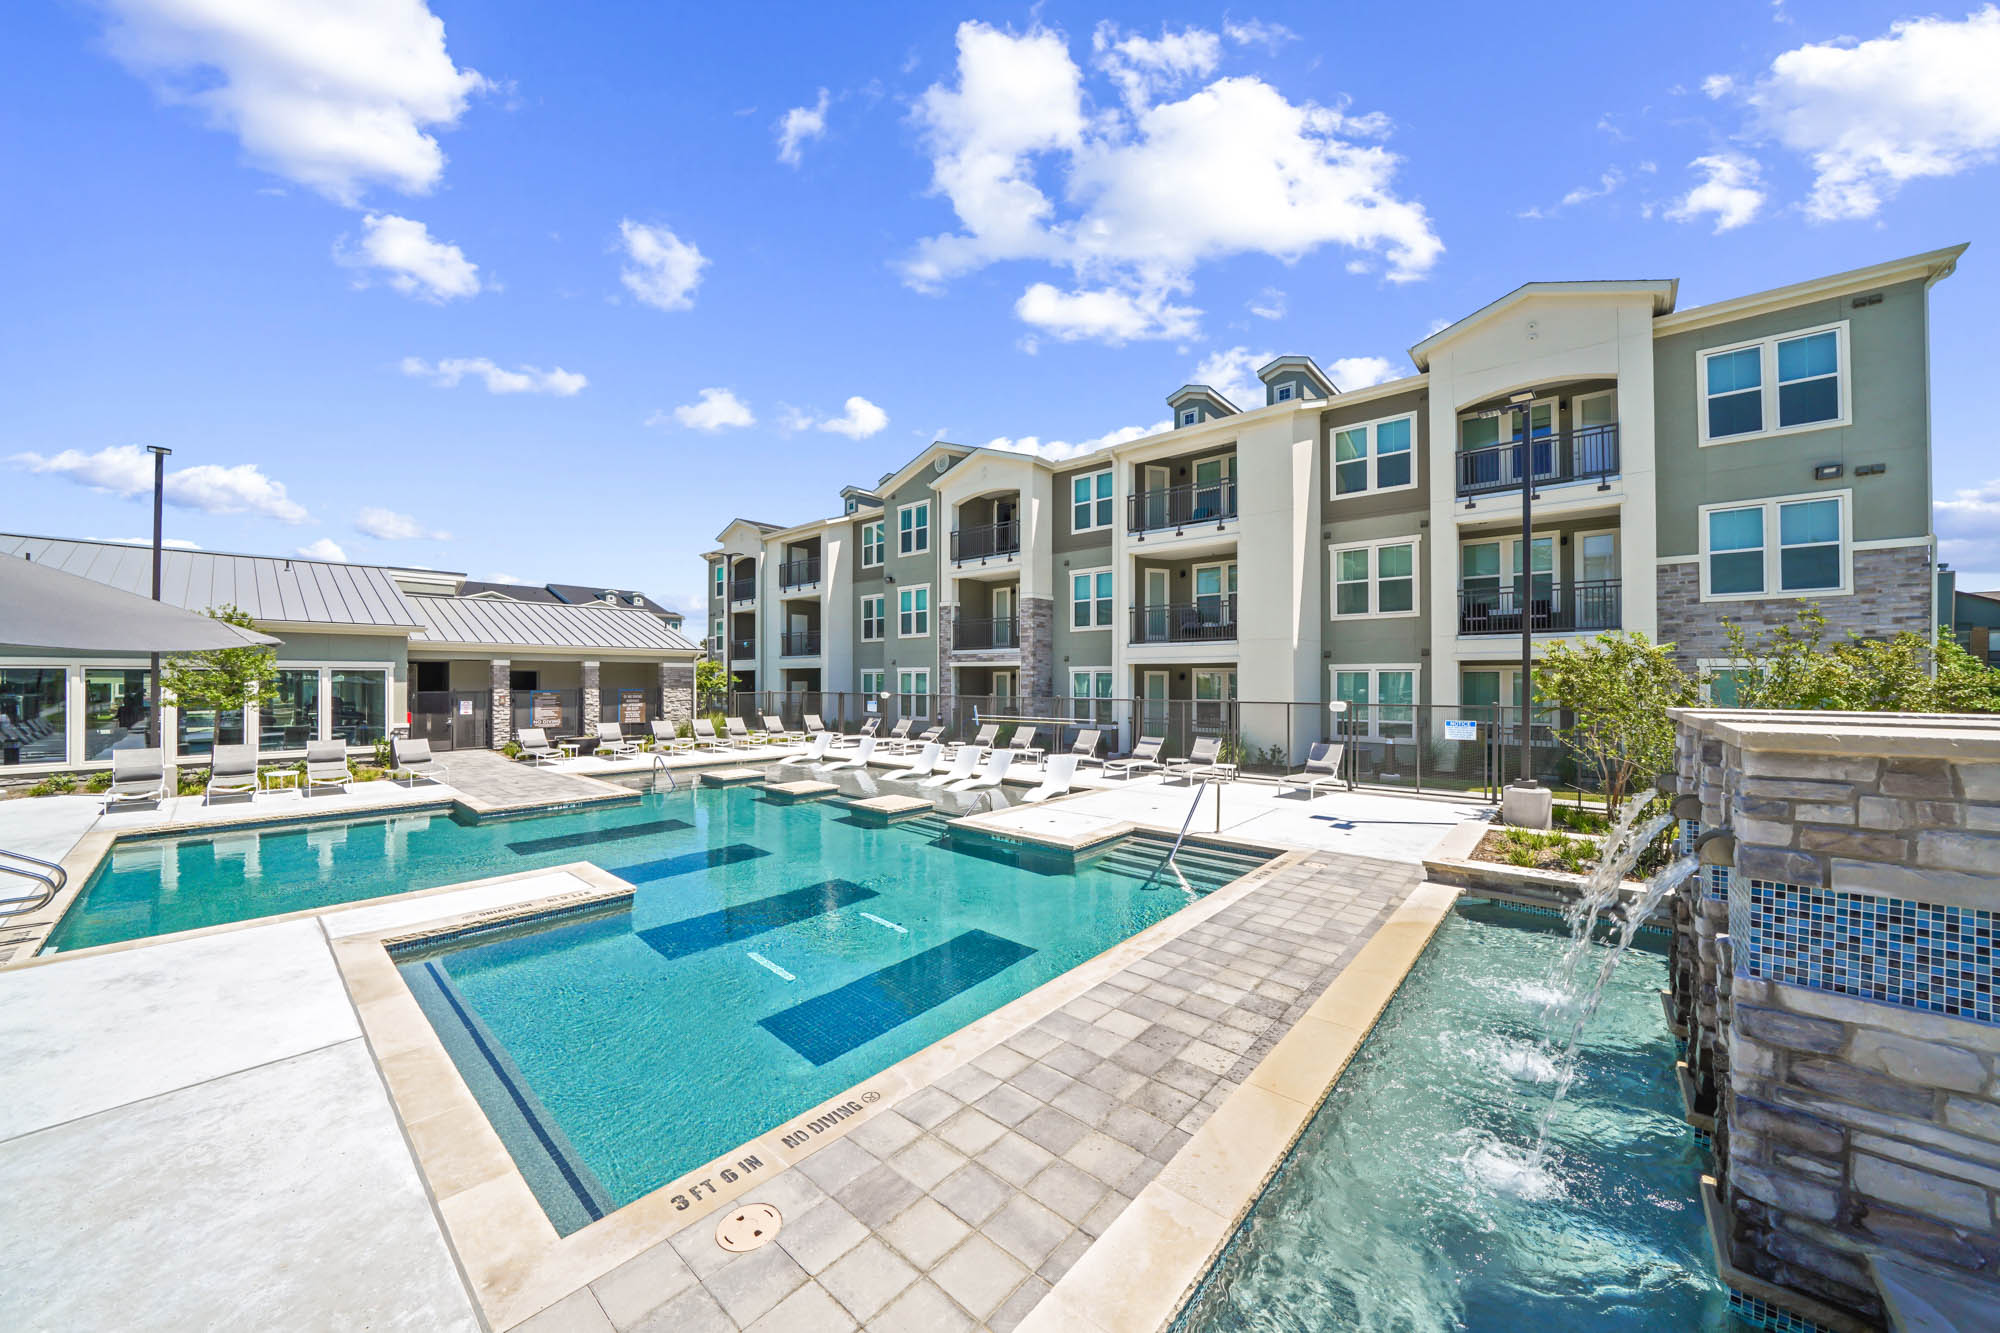 The pool at Embree Hill apartments in Dallas, TX.